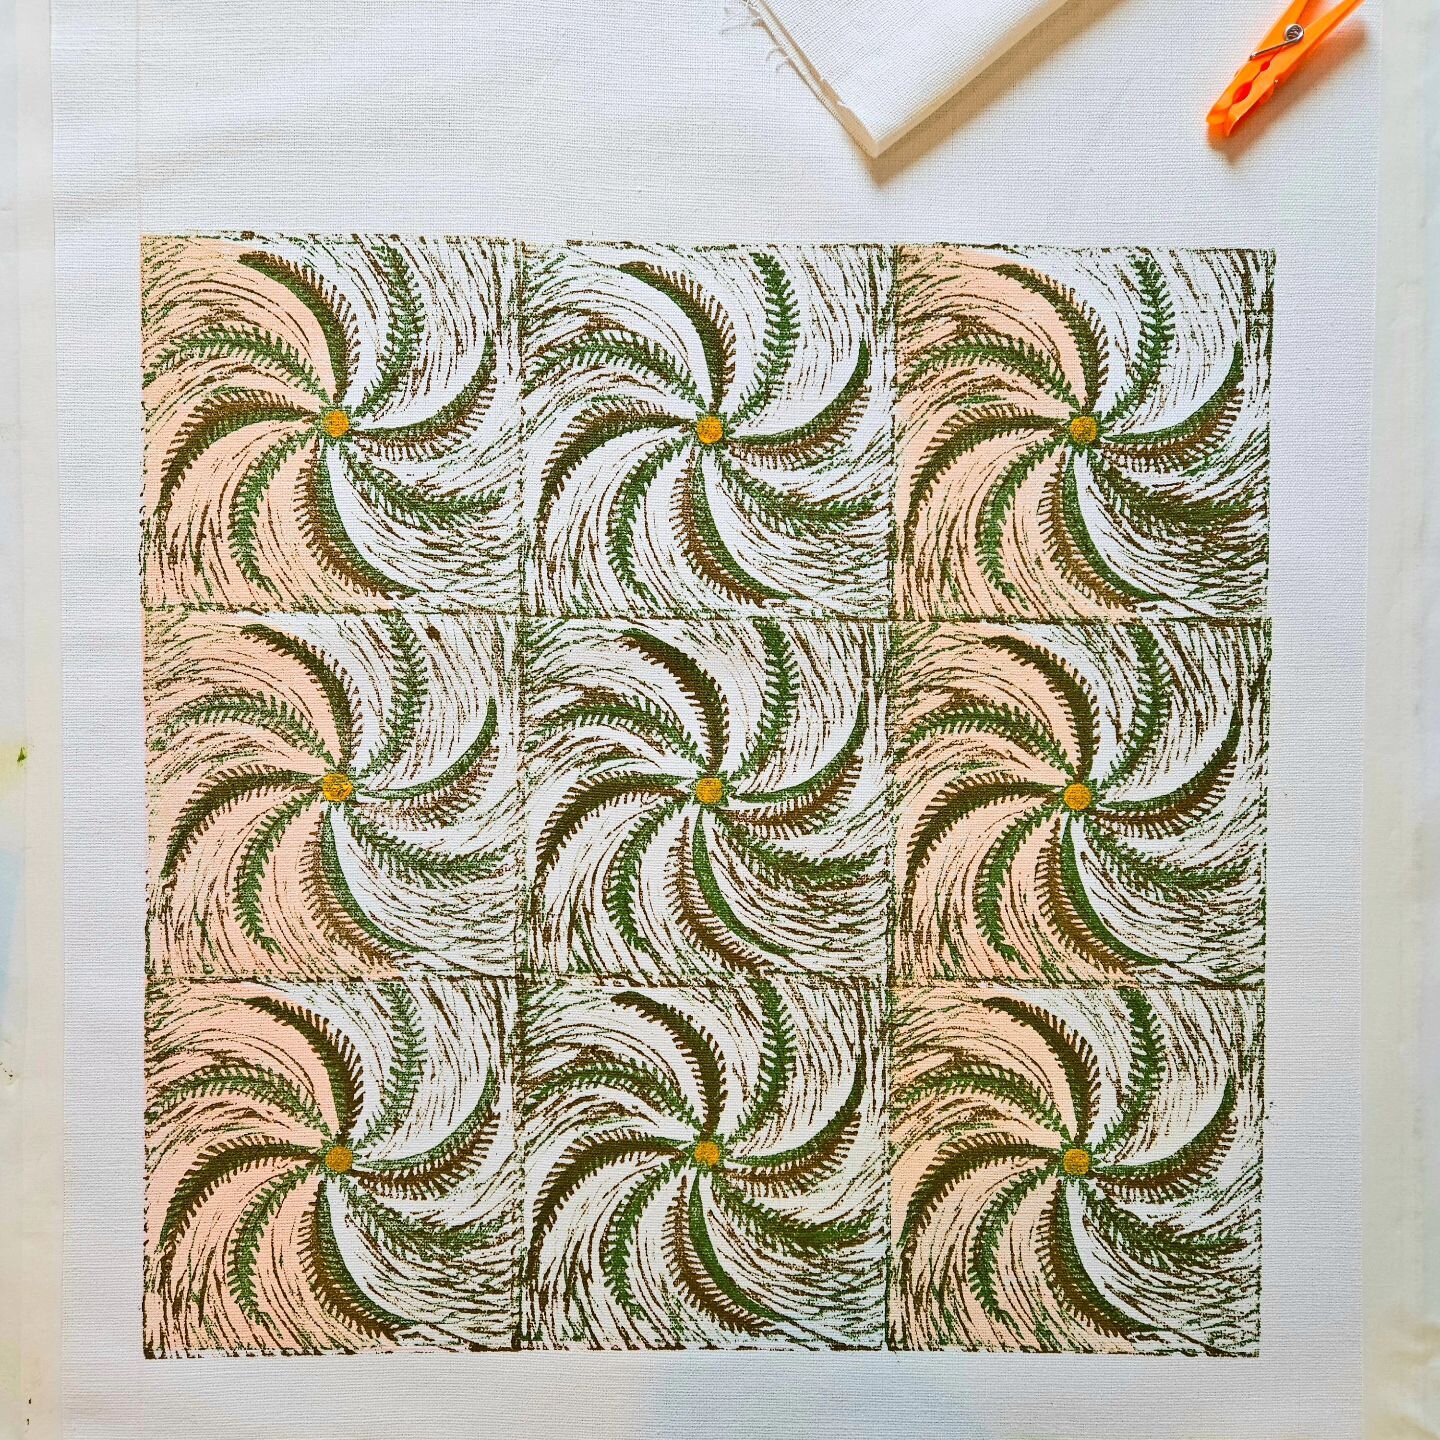 I'm printing a batch of big &amp; slouchy bags for the summer.  This design is based on a Welsh fern quilting pattern.
#handblockprinted #linoblockprintedtextiles #contemporarycraft #smallbatchtextiles #sheffieldsmallbusiness #shoppingbag #find.amake